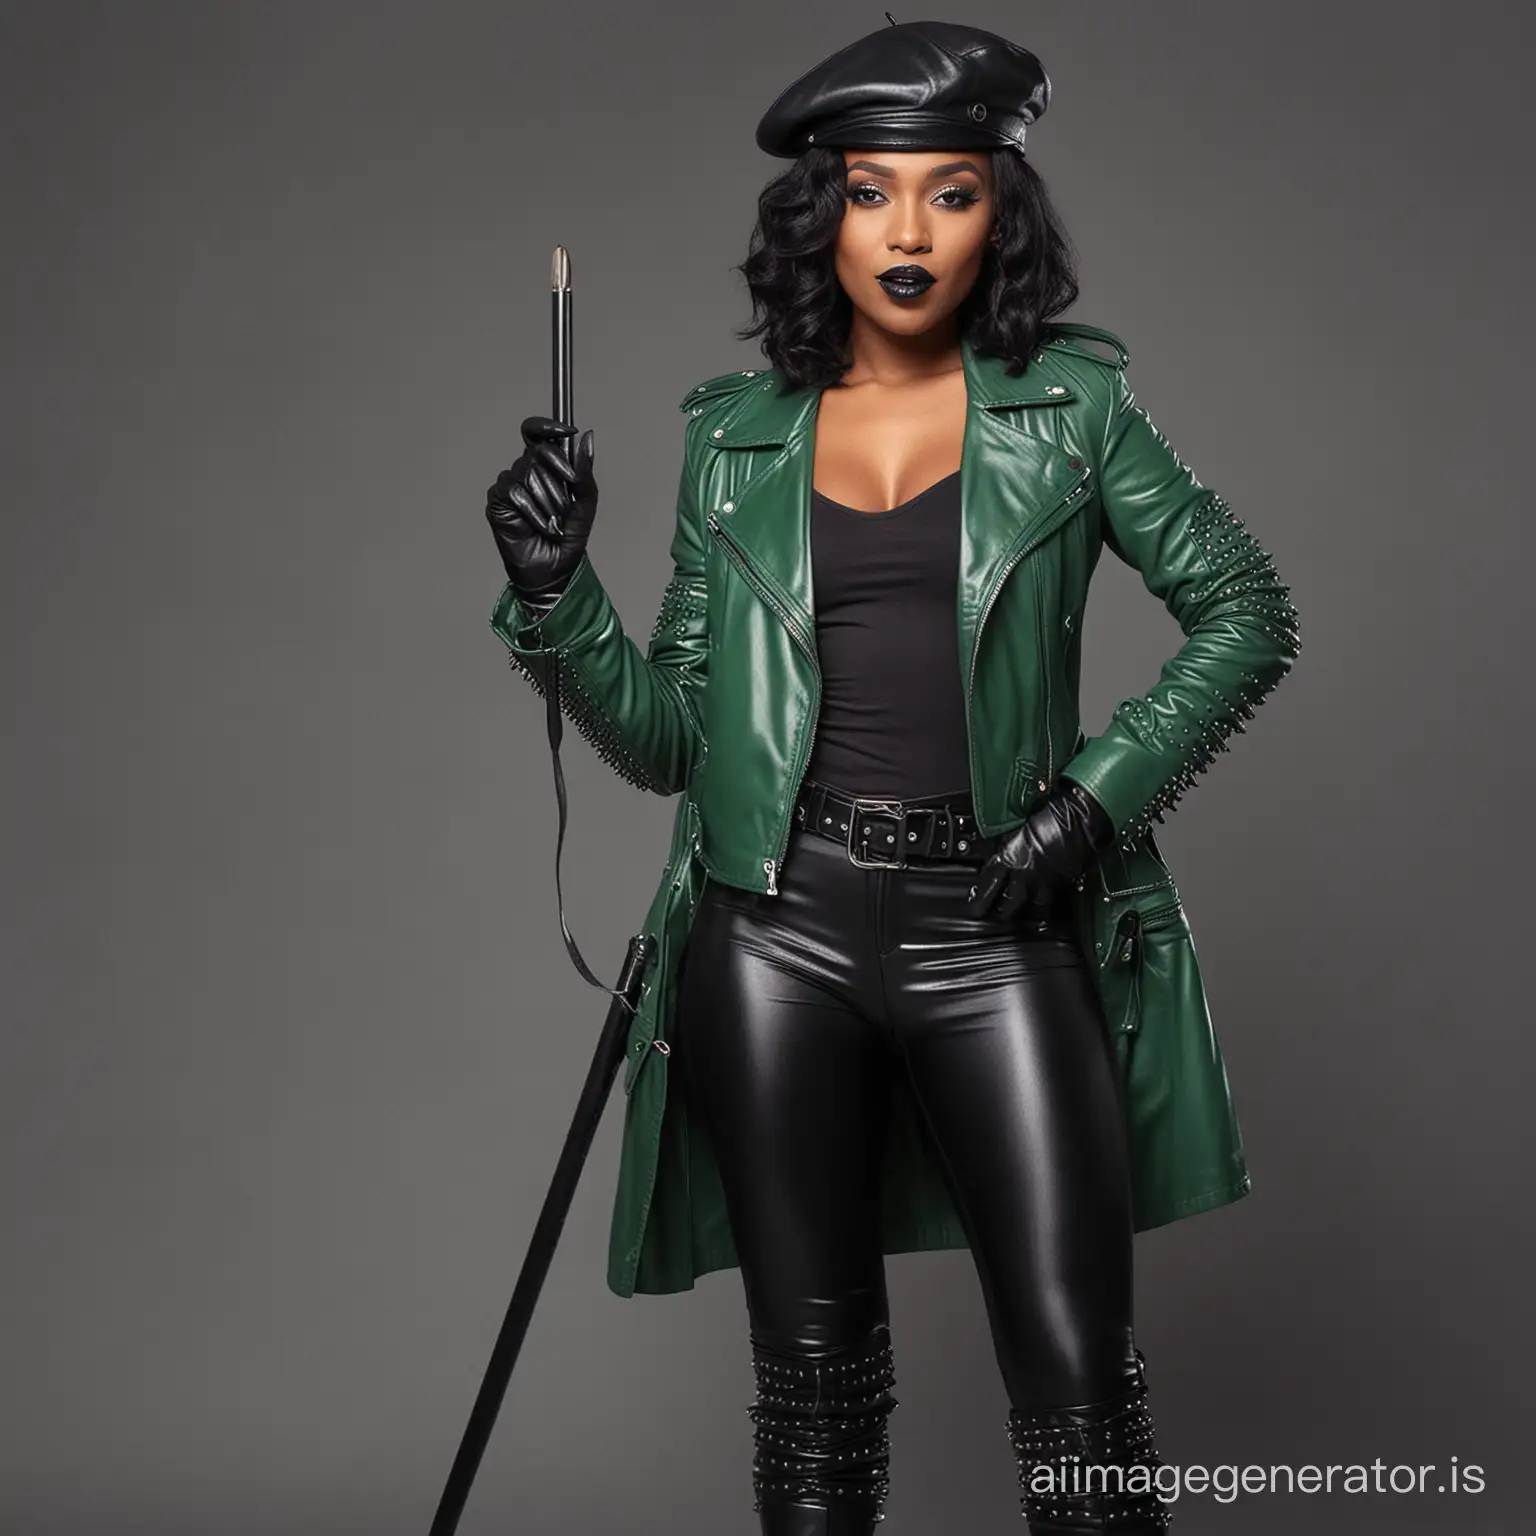 ebony woman in black leather gloves, spiked green motorcycle jacket. and black lipstick, leather masters cap, high heel leather boots, holding night stick